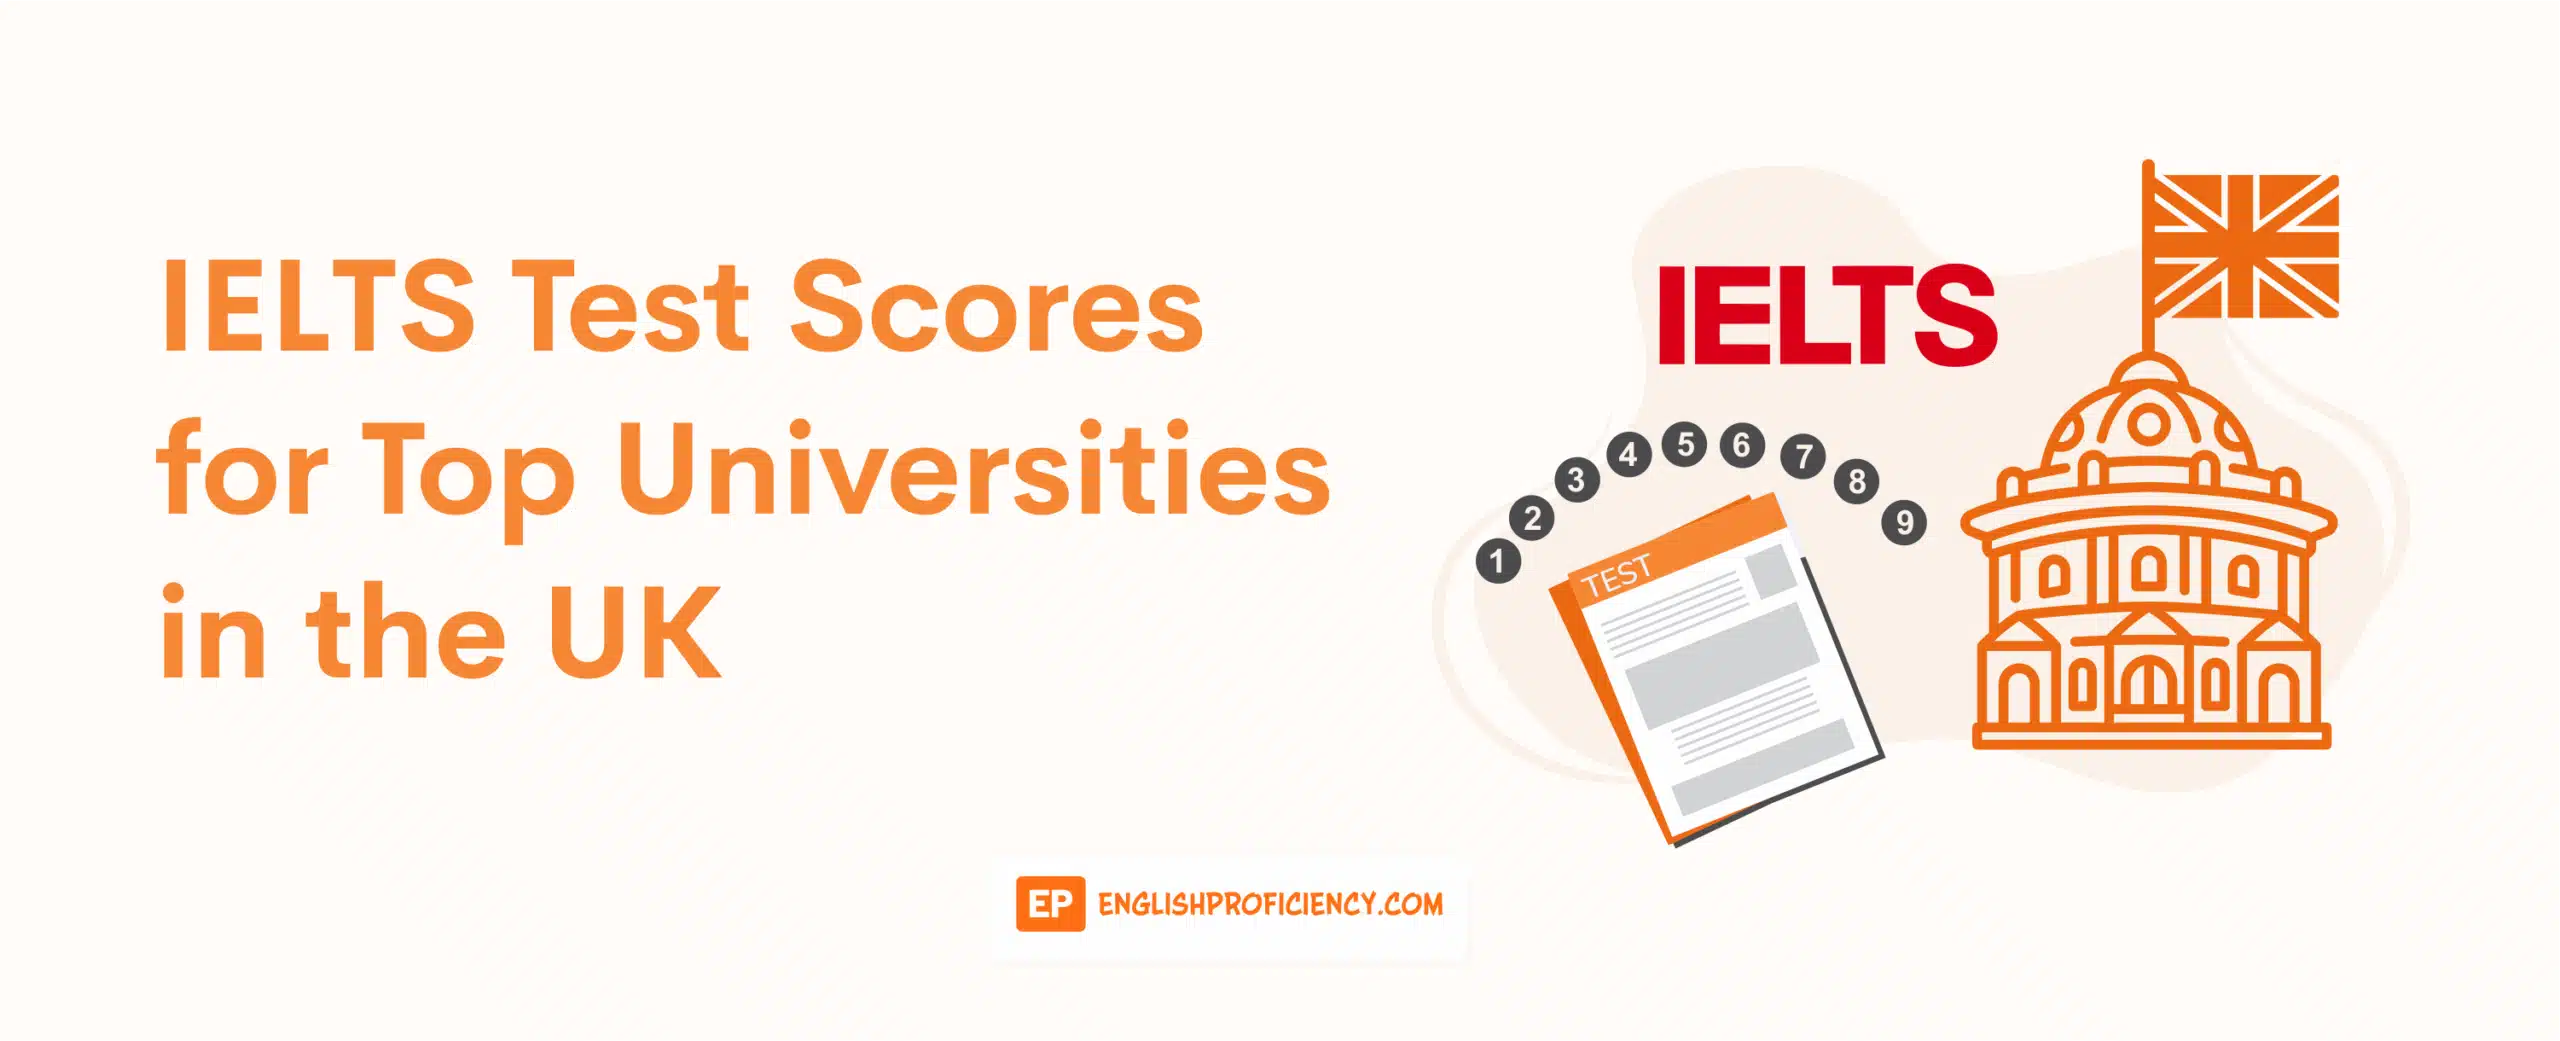 IELTS Test Scores for the Top Universities in the UK